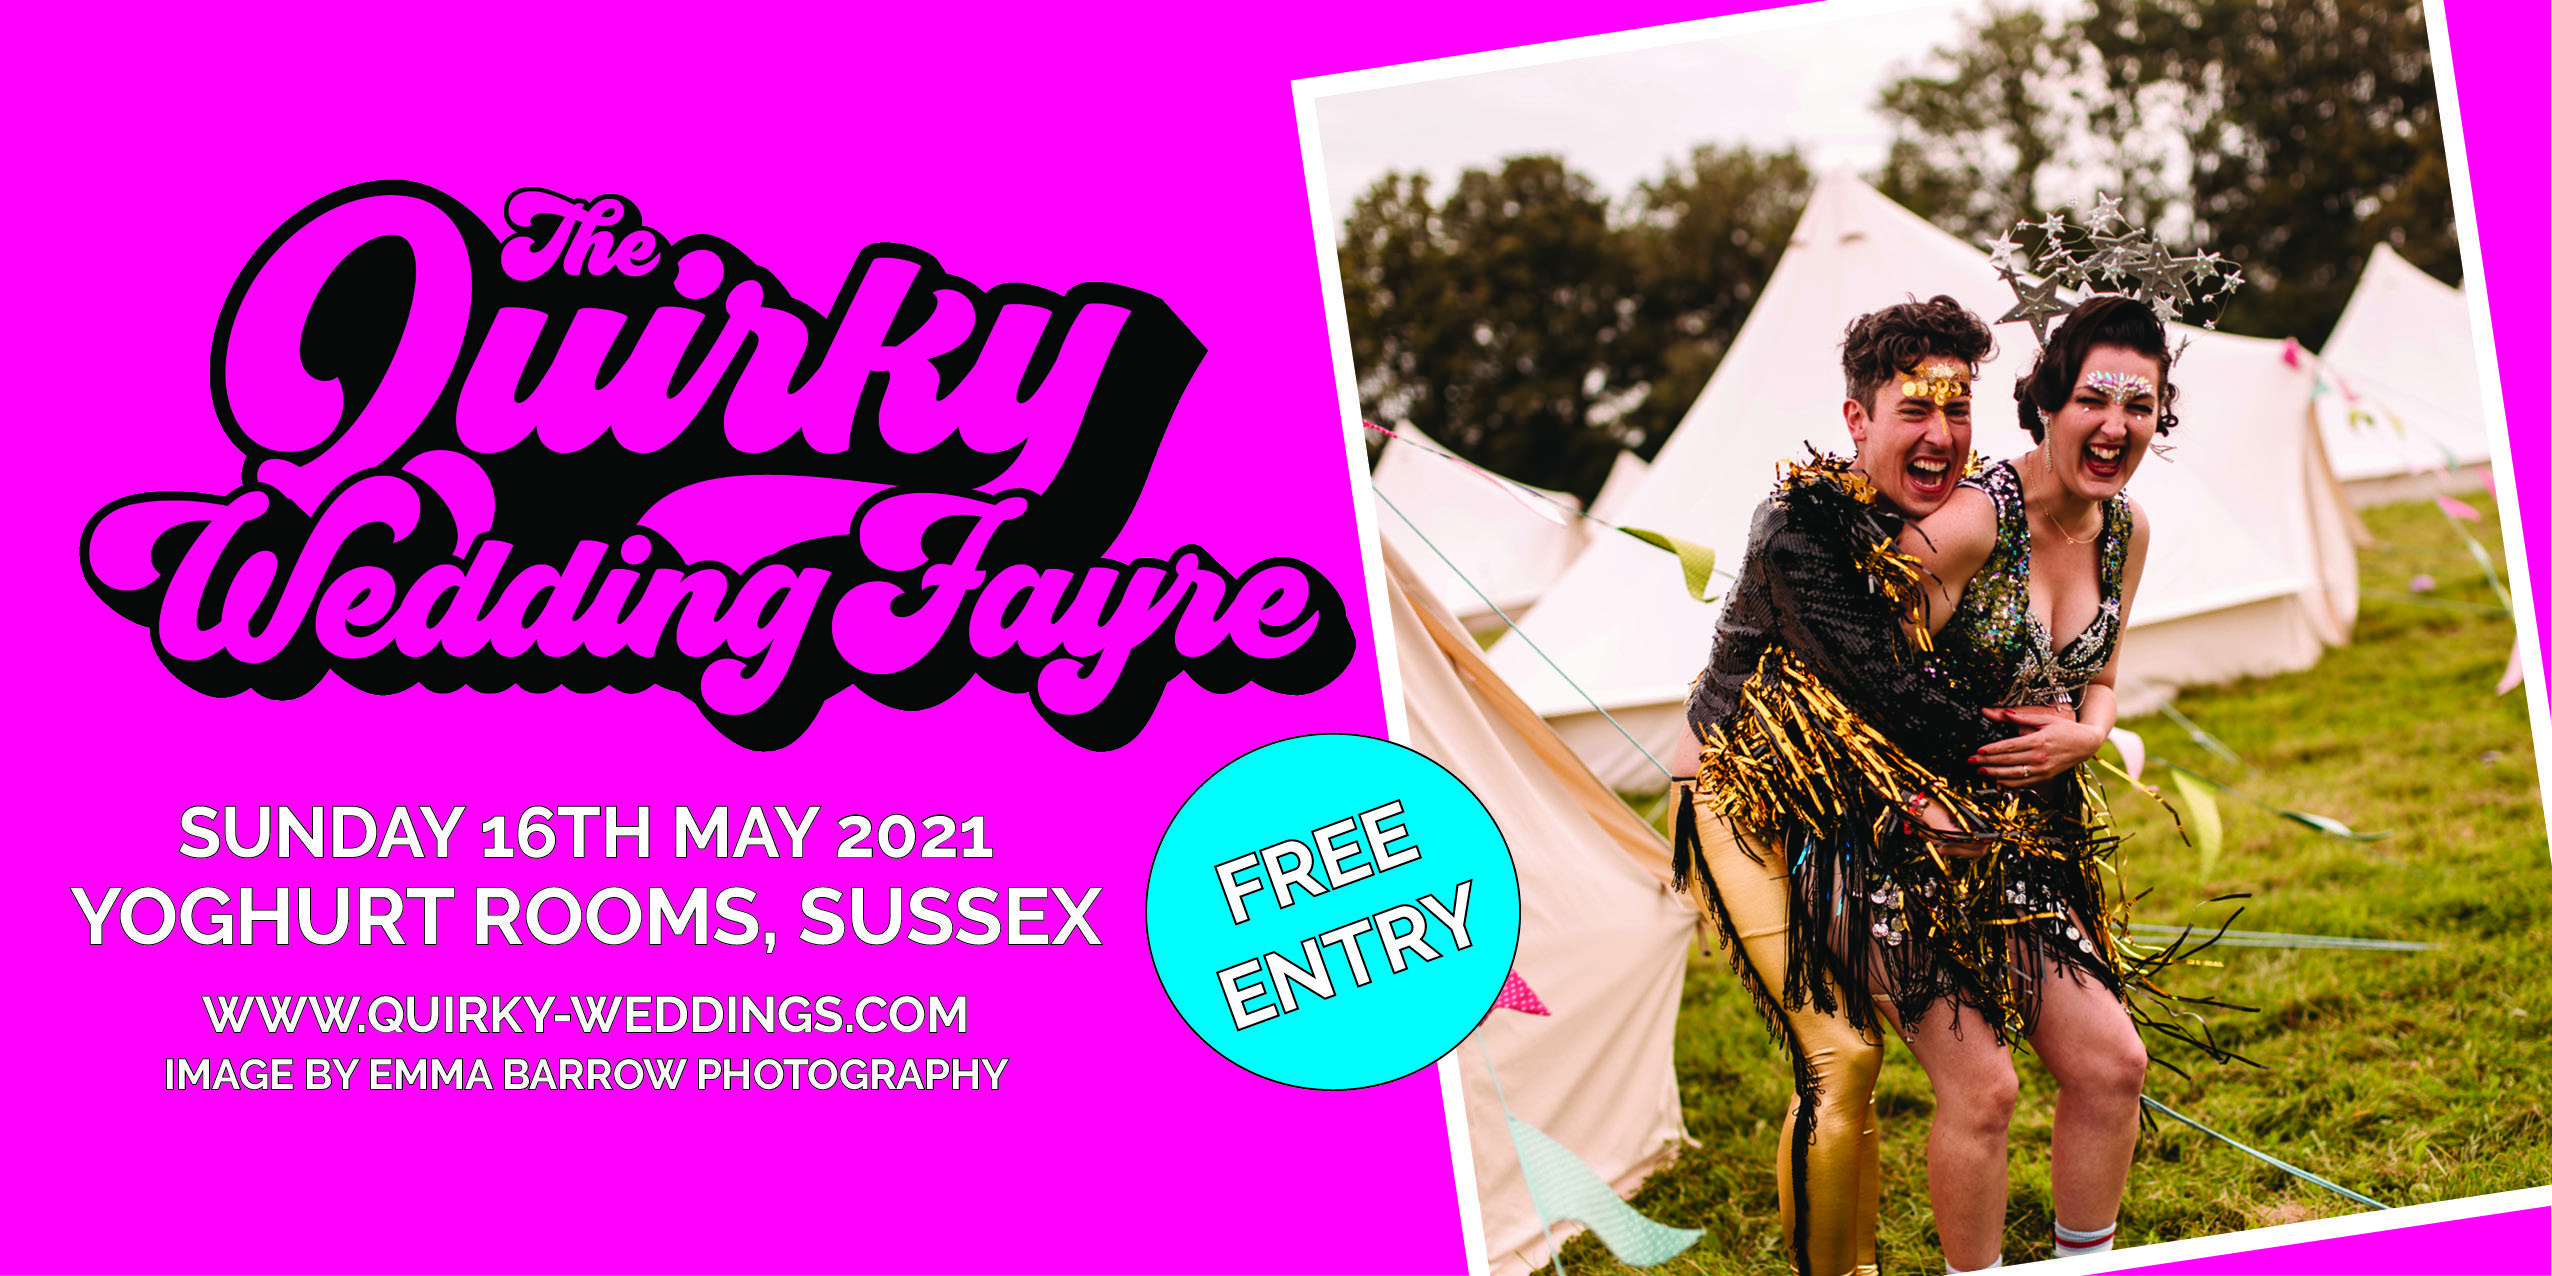 The Quirky Wedding Fayre @ Yoghurt Rooms